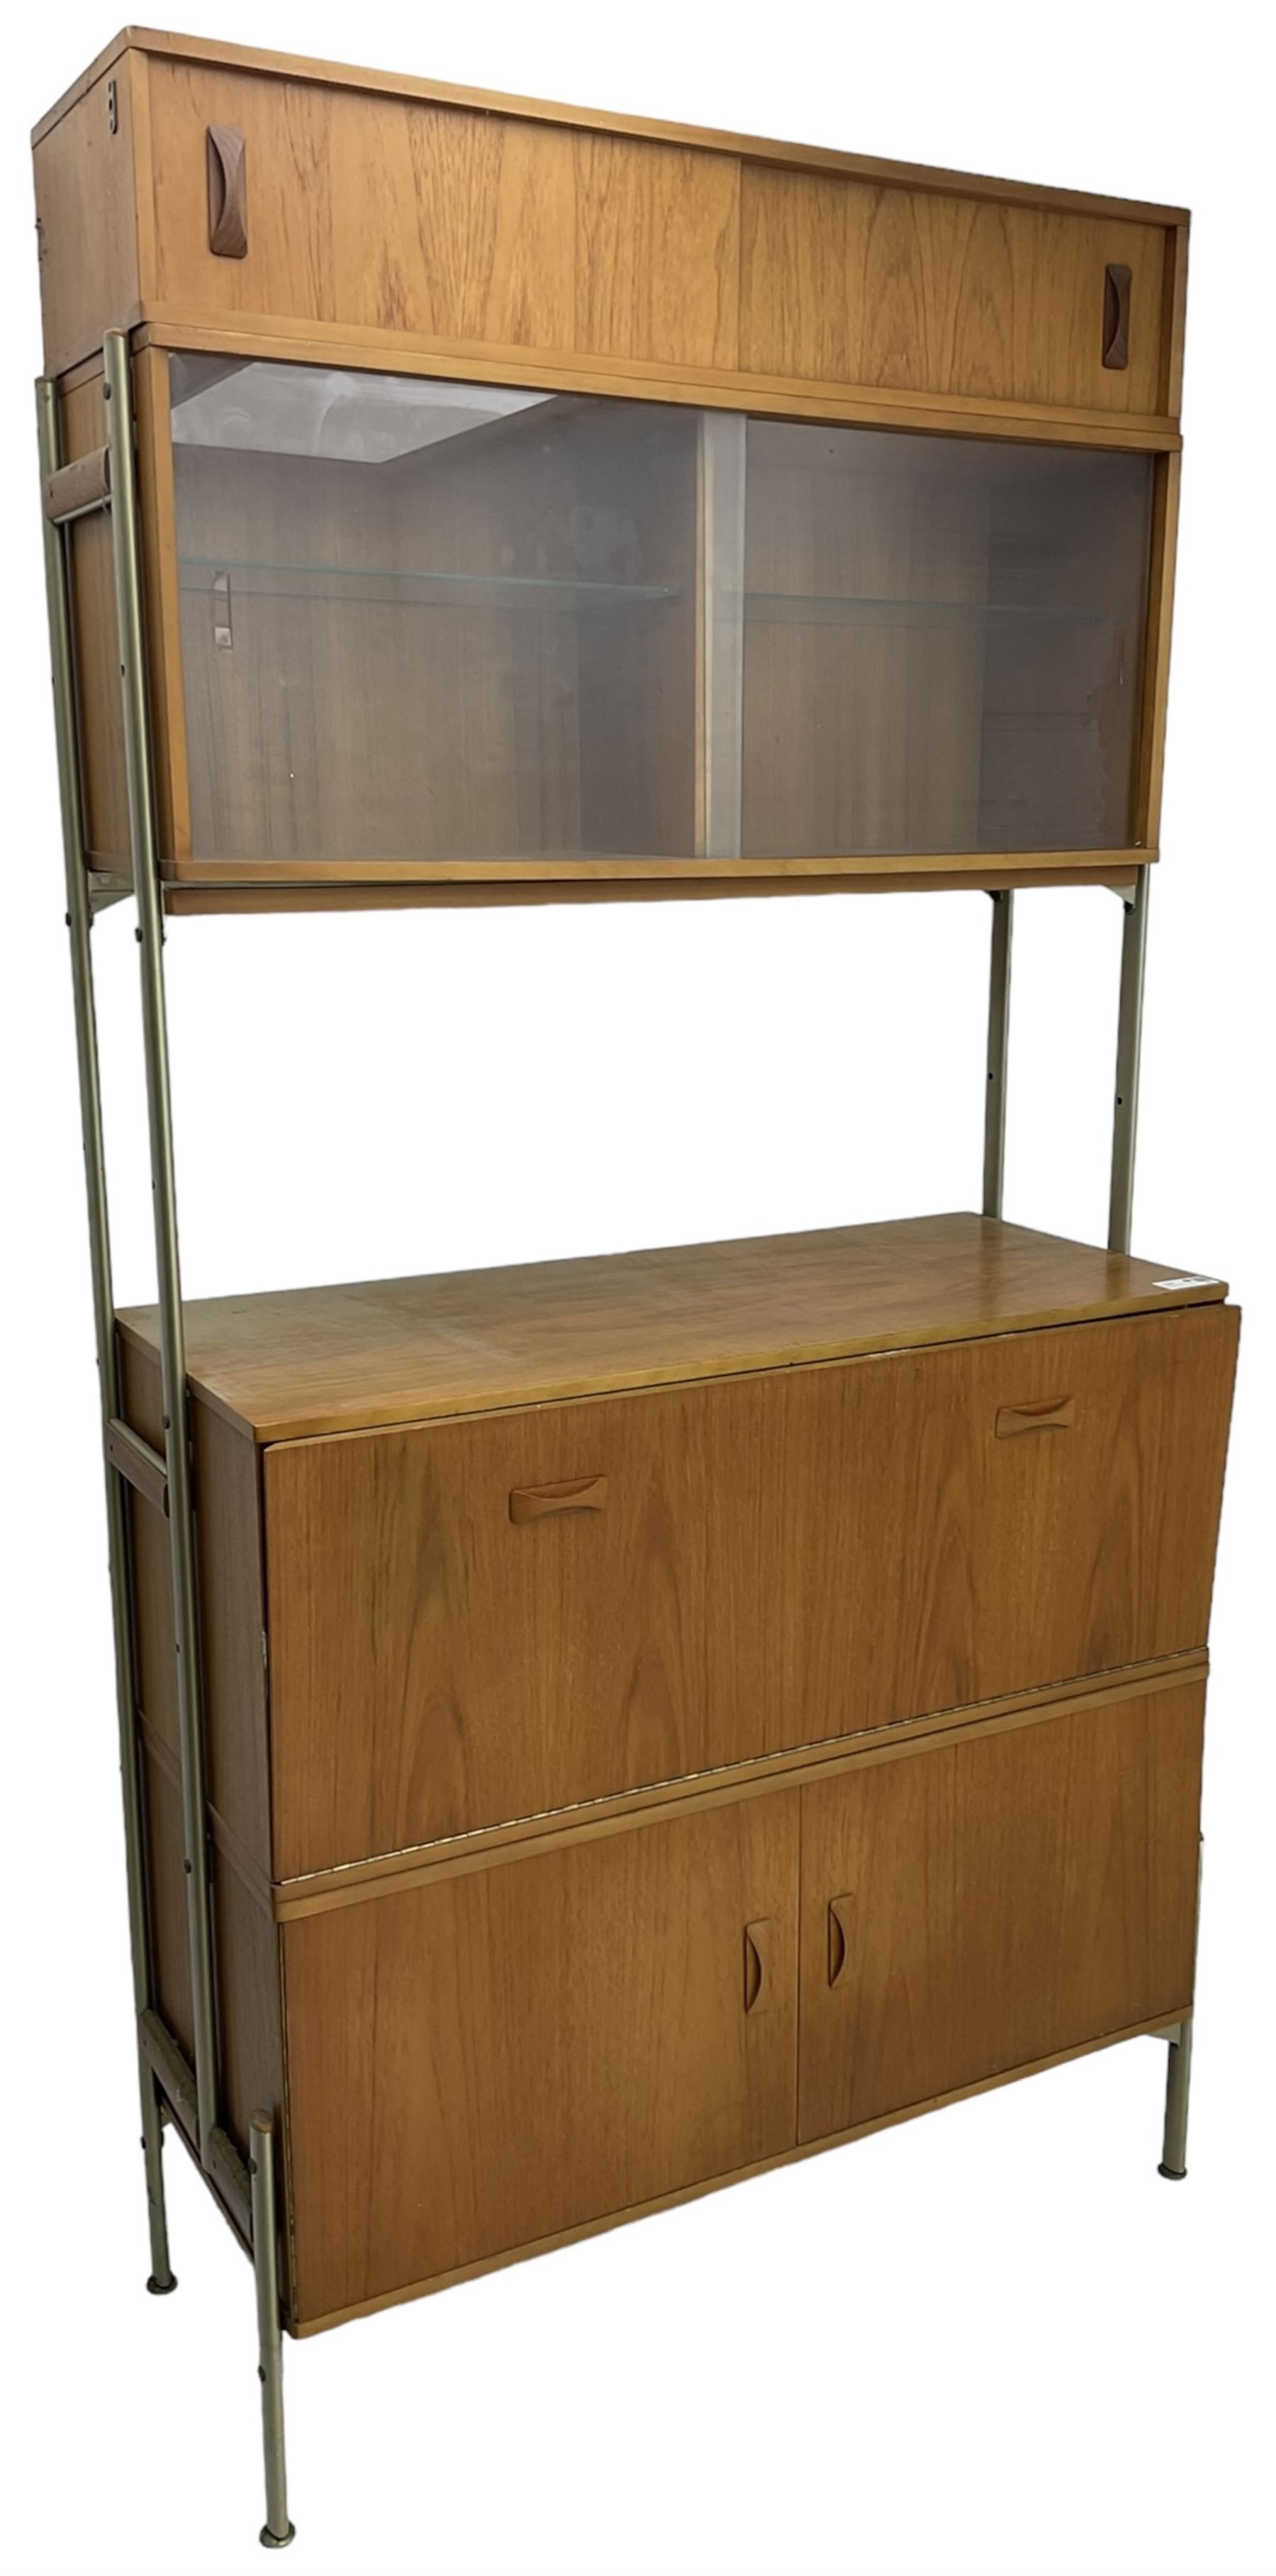 Remploy - mid-20th century teak sectional wall display unit or room divider - Image 3 of 5